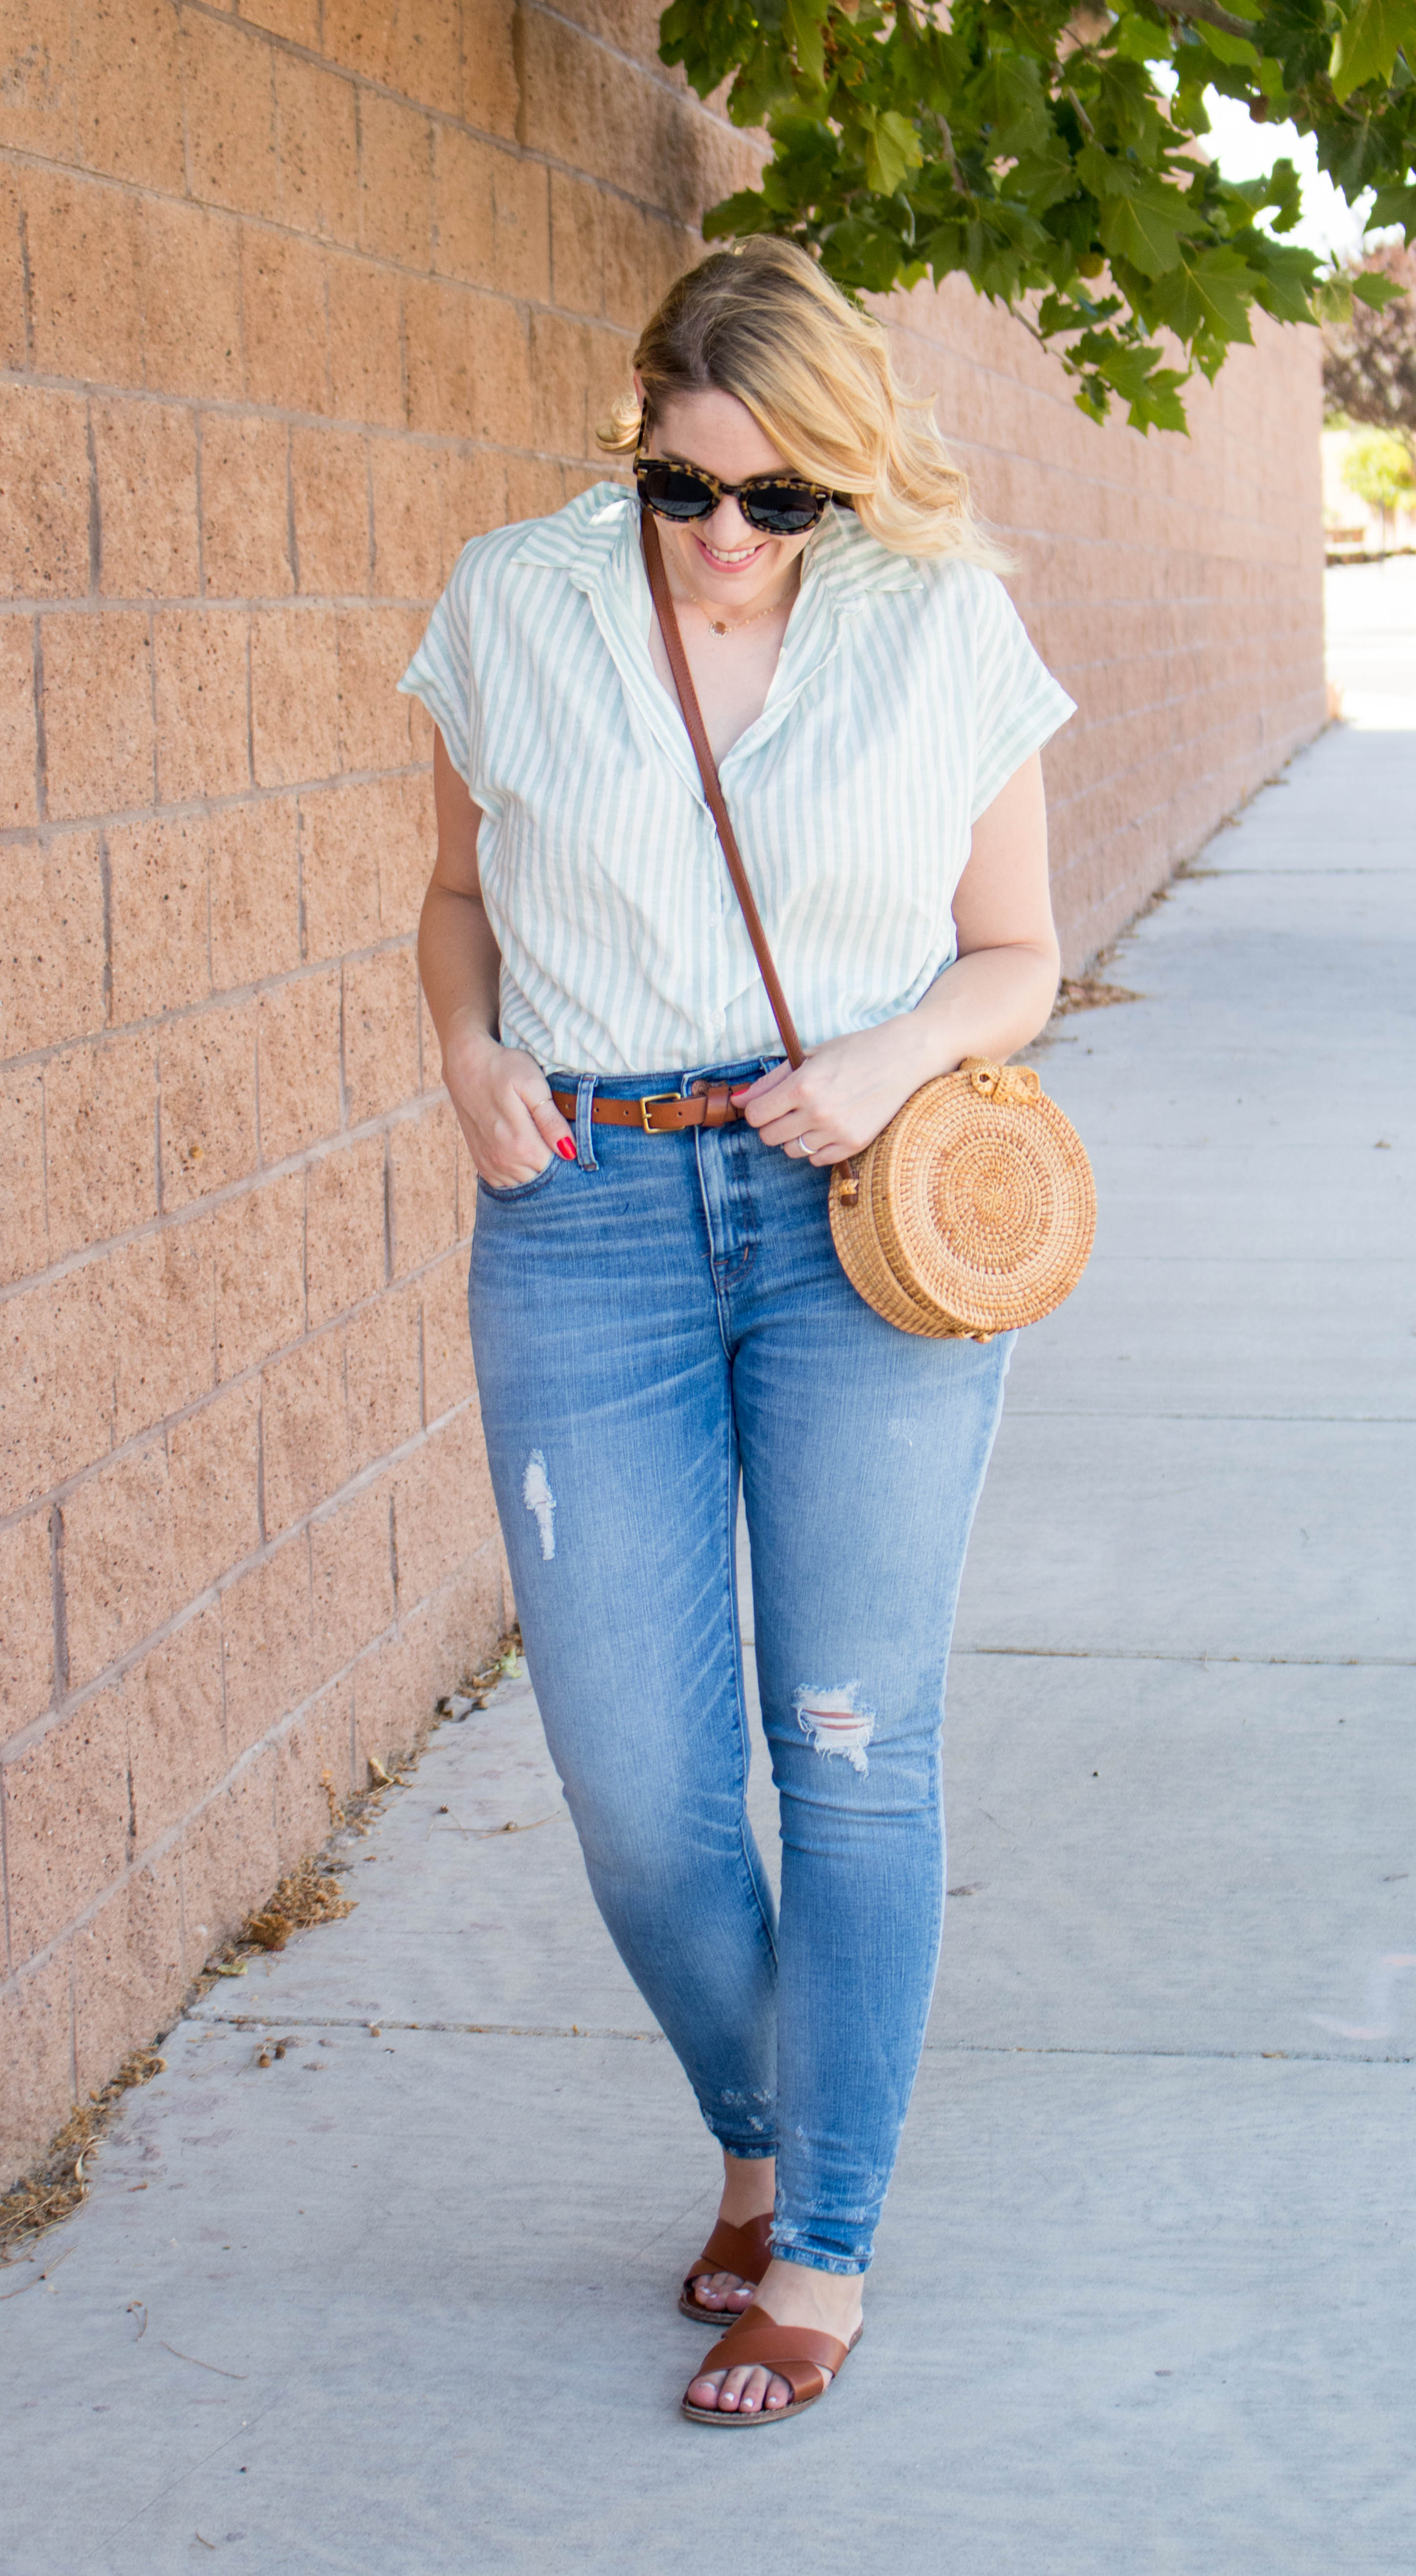 easy summer style high rise jeans madewell #summeroutfit #statementbag #circlebag #madewelljeans